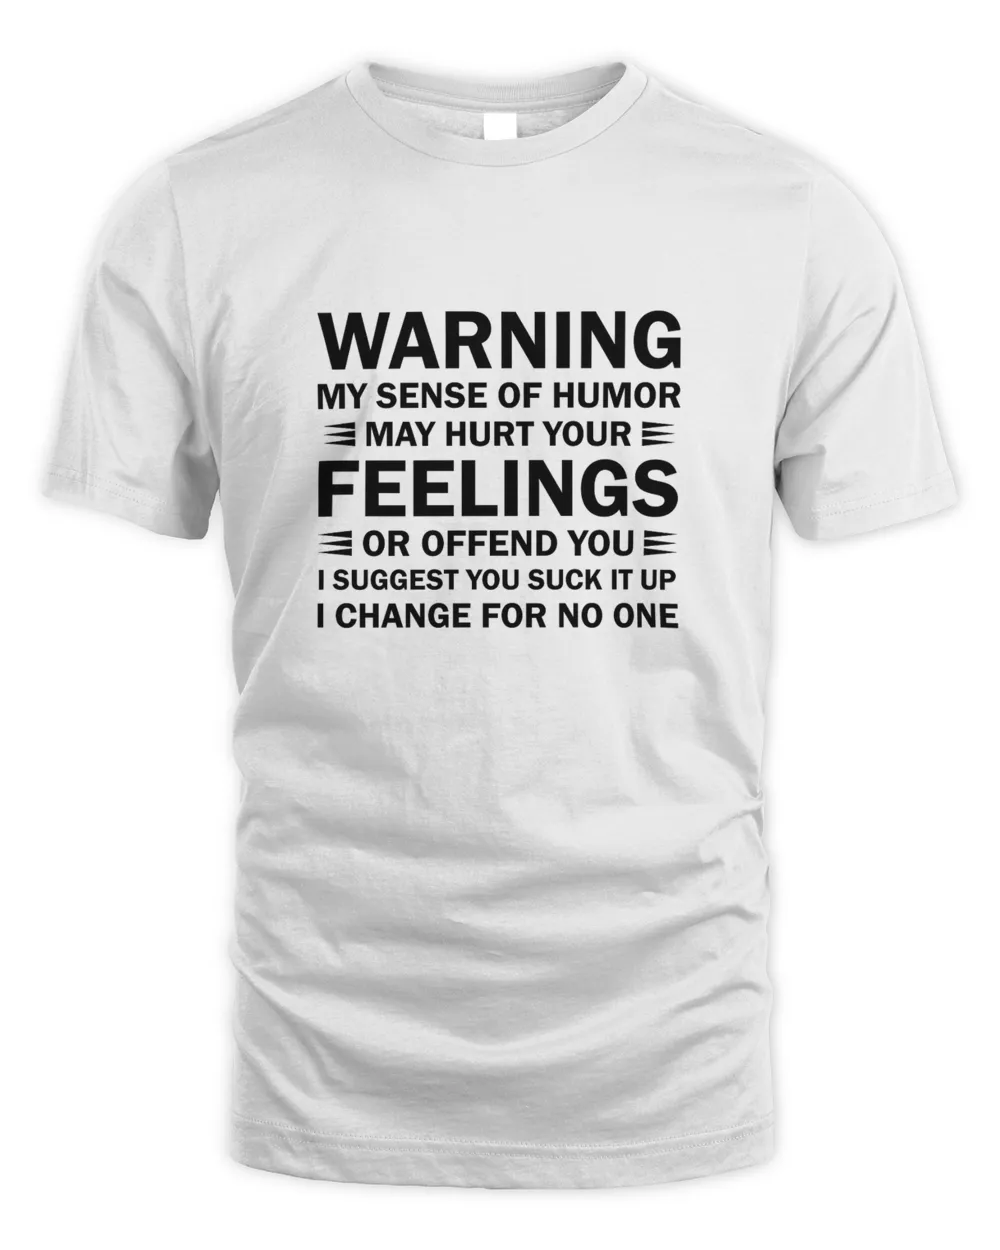 Warning My Sense Of Humor May Hurt Your Feelings Or Offend You I Suggest You Suck It Up I Change For No One Shirt